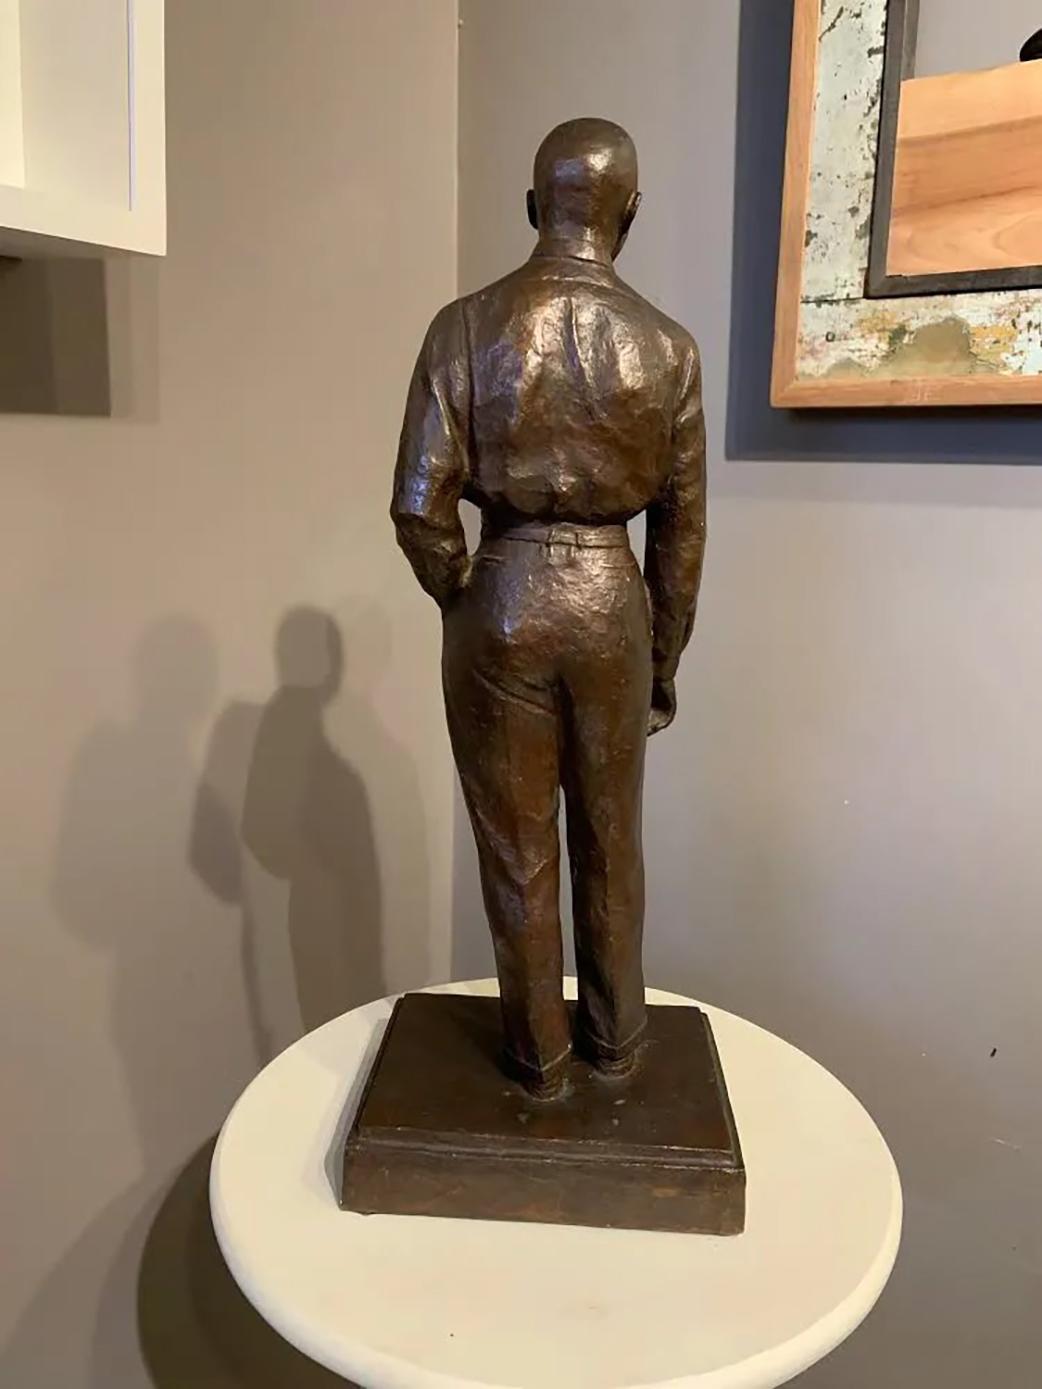 A Mid 20th century American School cast patinated bronze sculpture of a gentleman or businessman, probably circa 1930-1950, unsigned, with a question mark on the front of the base. Very good condition, with great patina and minimal imperfections.